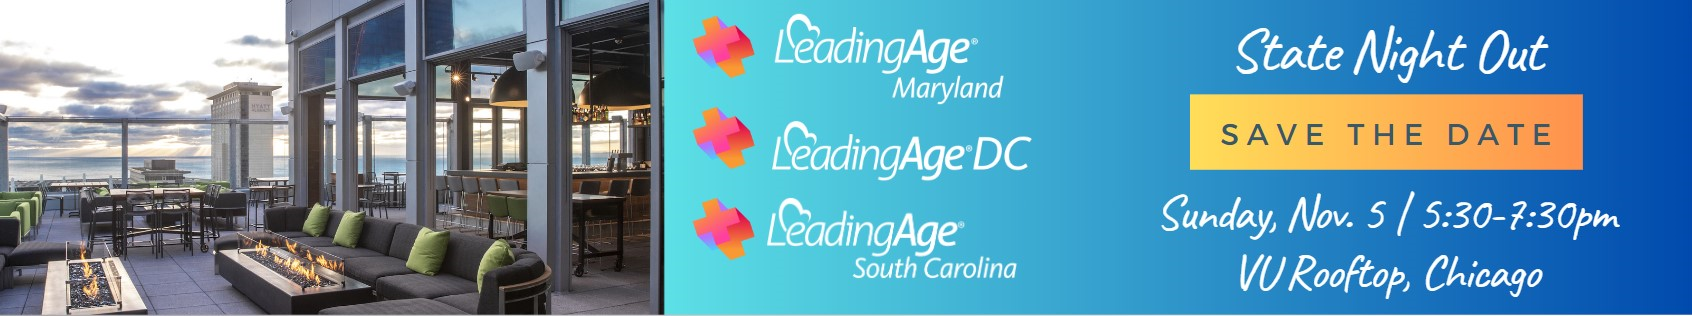 LeadingAgeSC - State Night Out - Save The Date